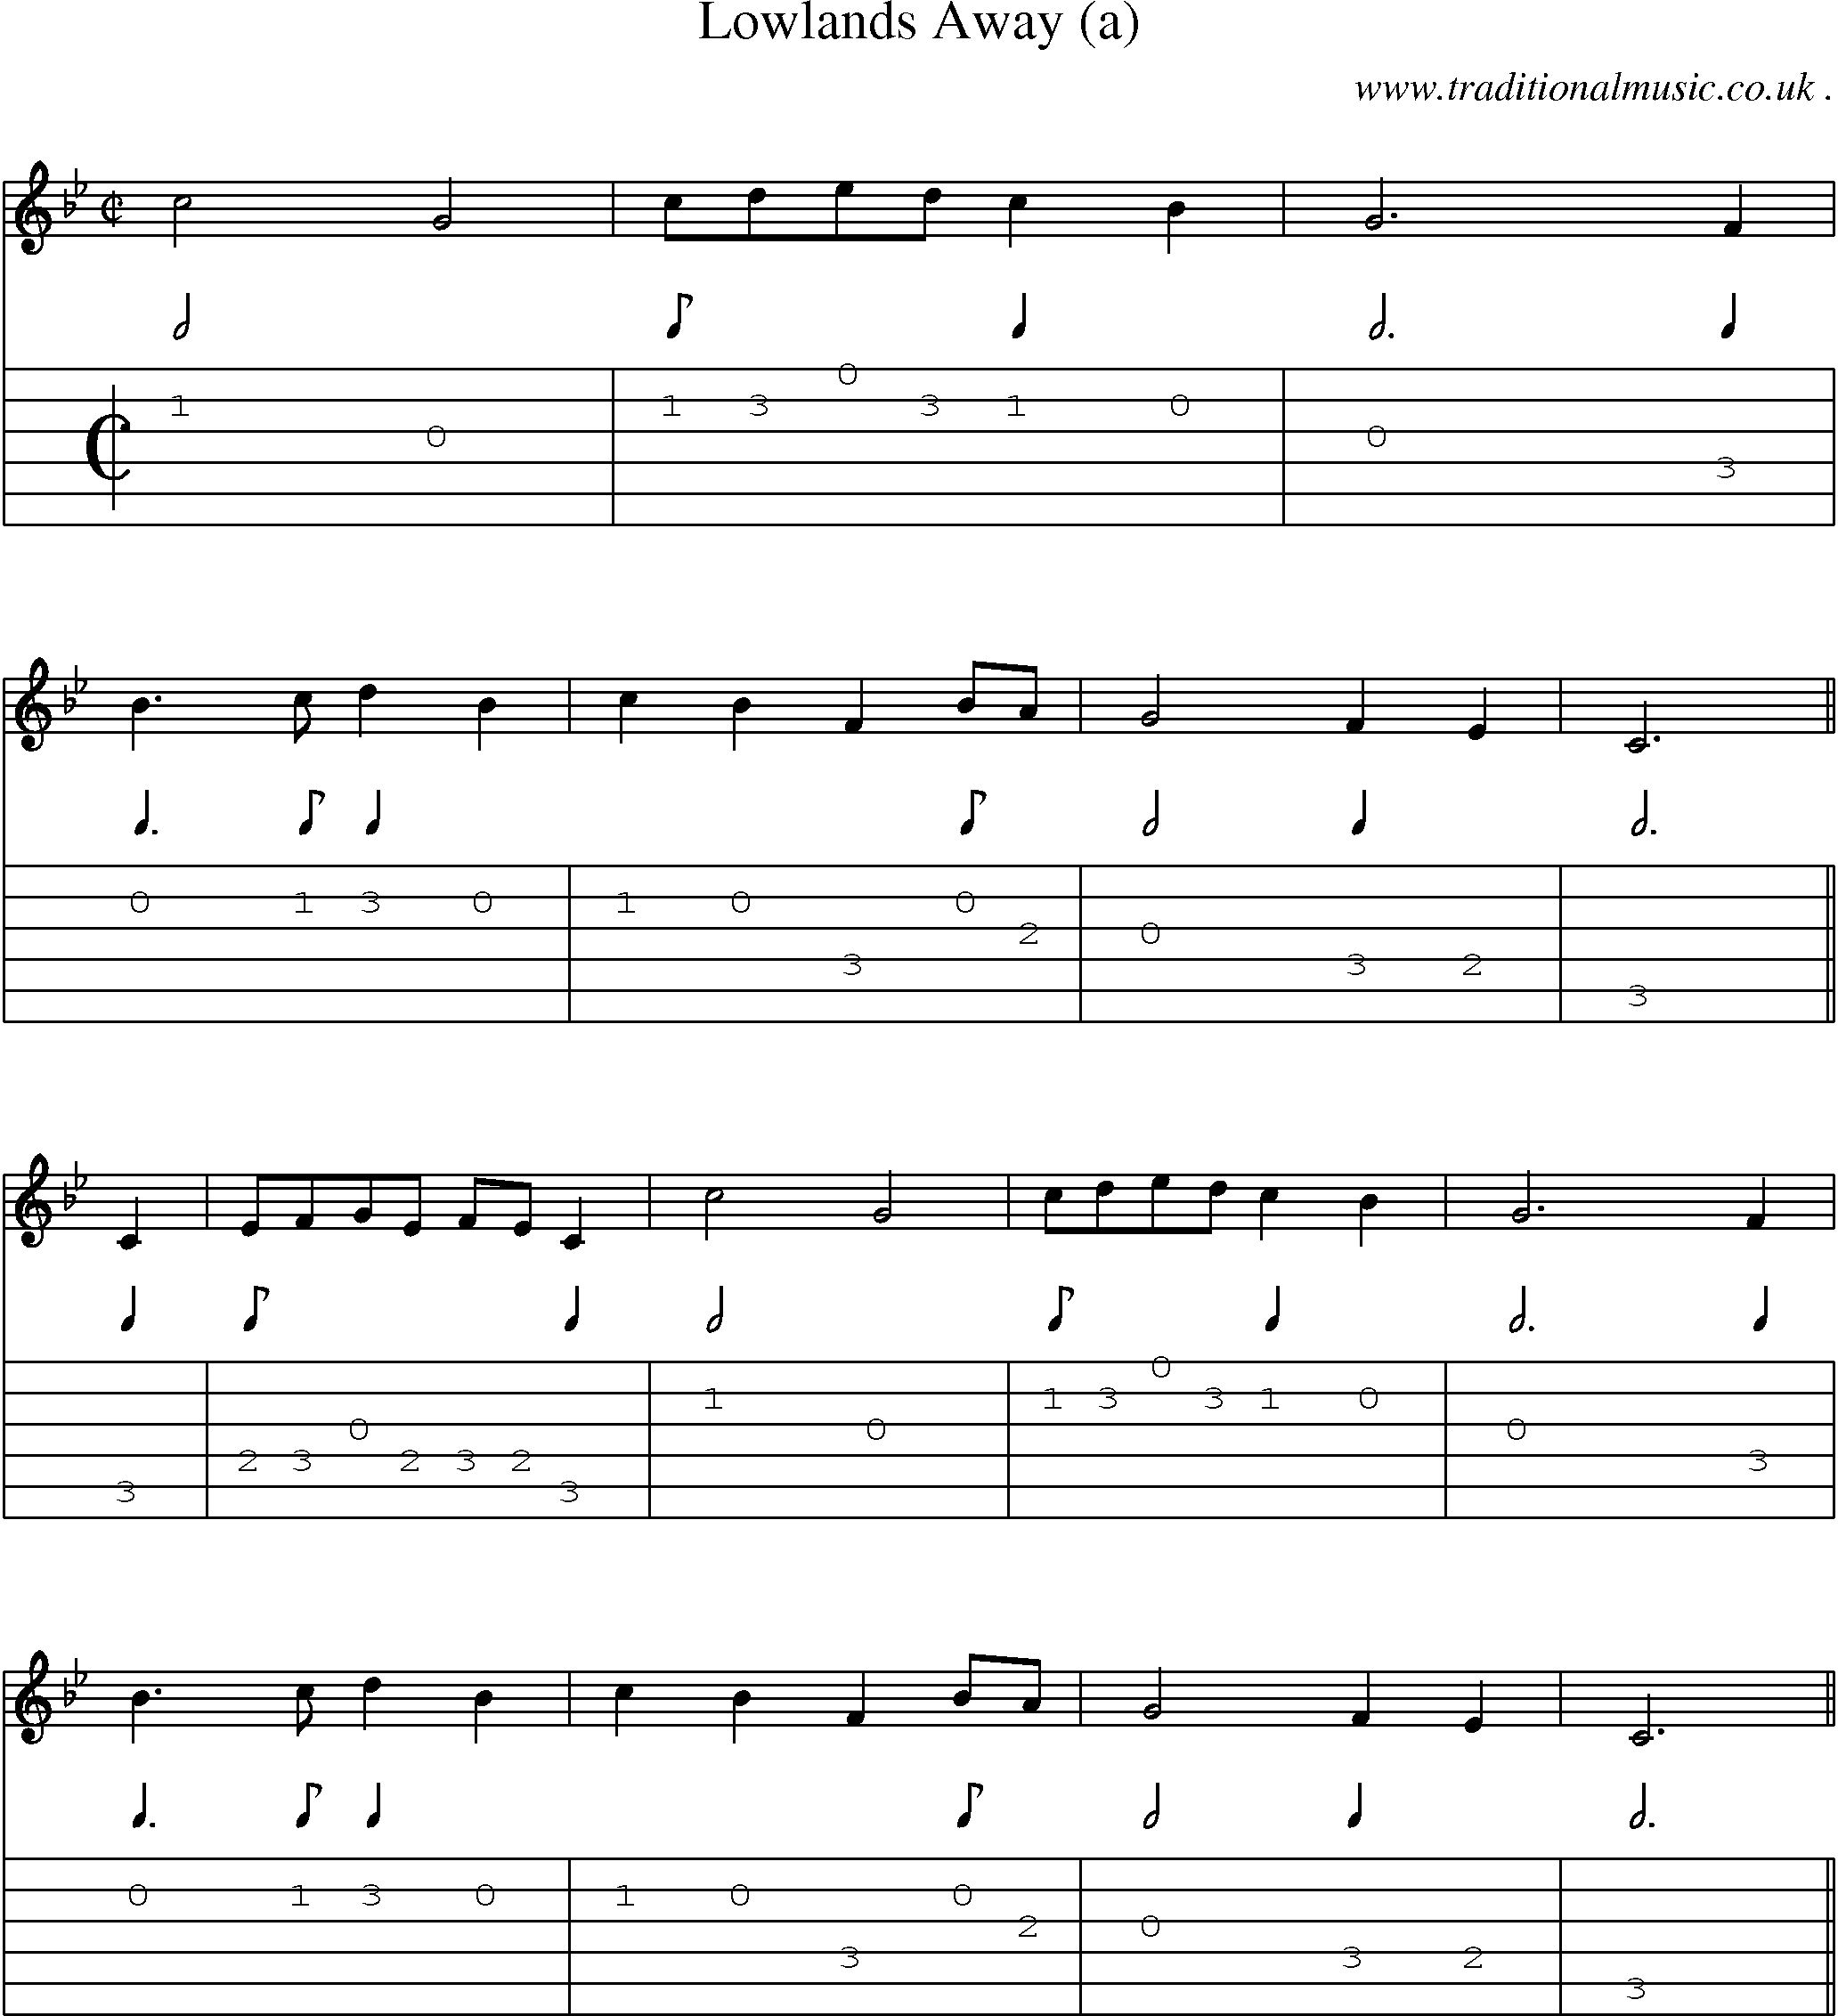 Sheet-Music and Guitar Tabs for Lowlands Away (a)